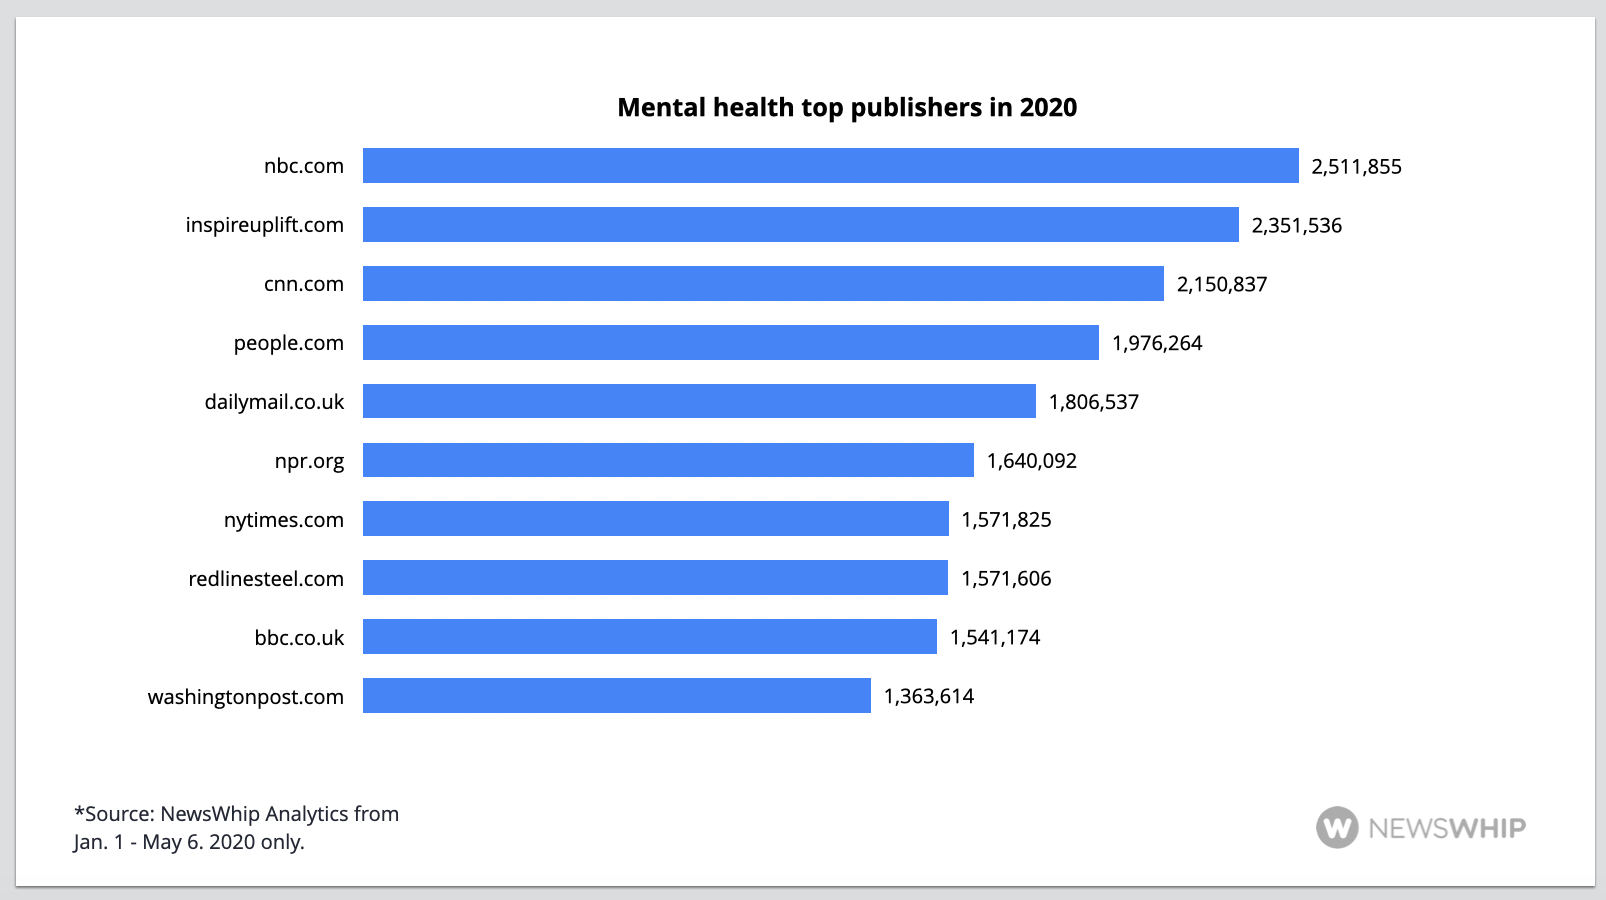 Histogram showing the top publishers of mental health content in 2020